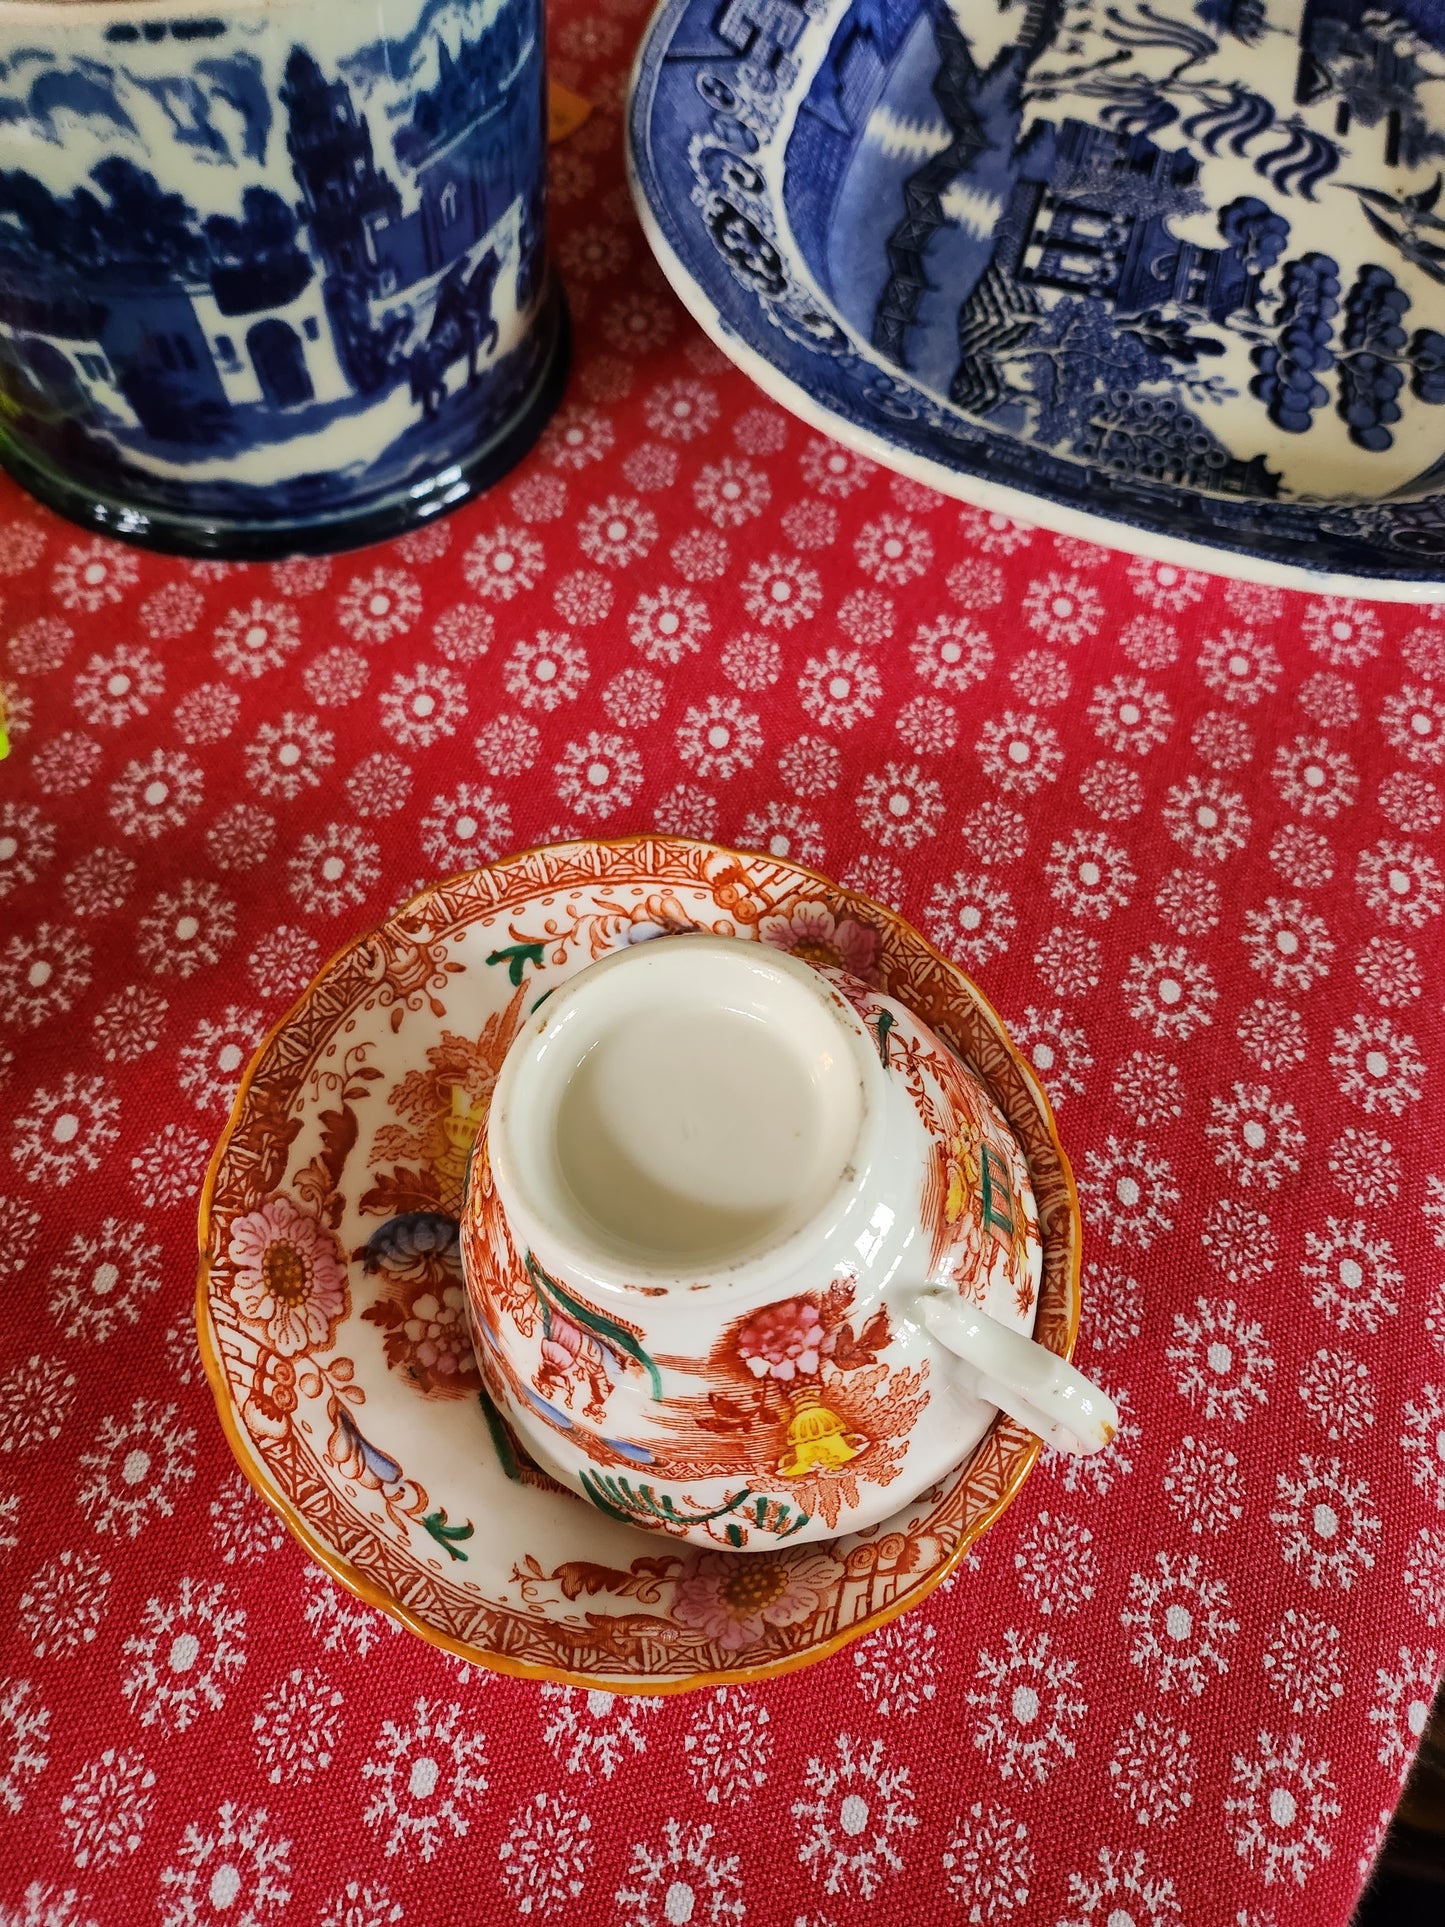 Victorian hand painted teaset